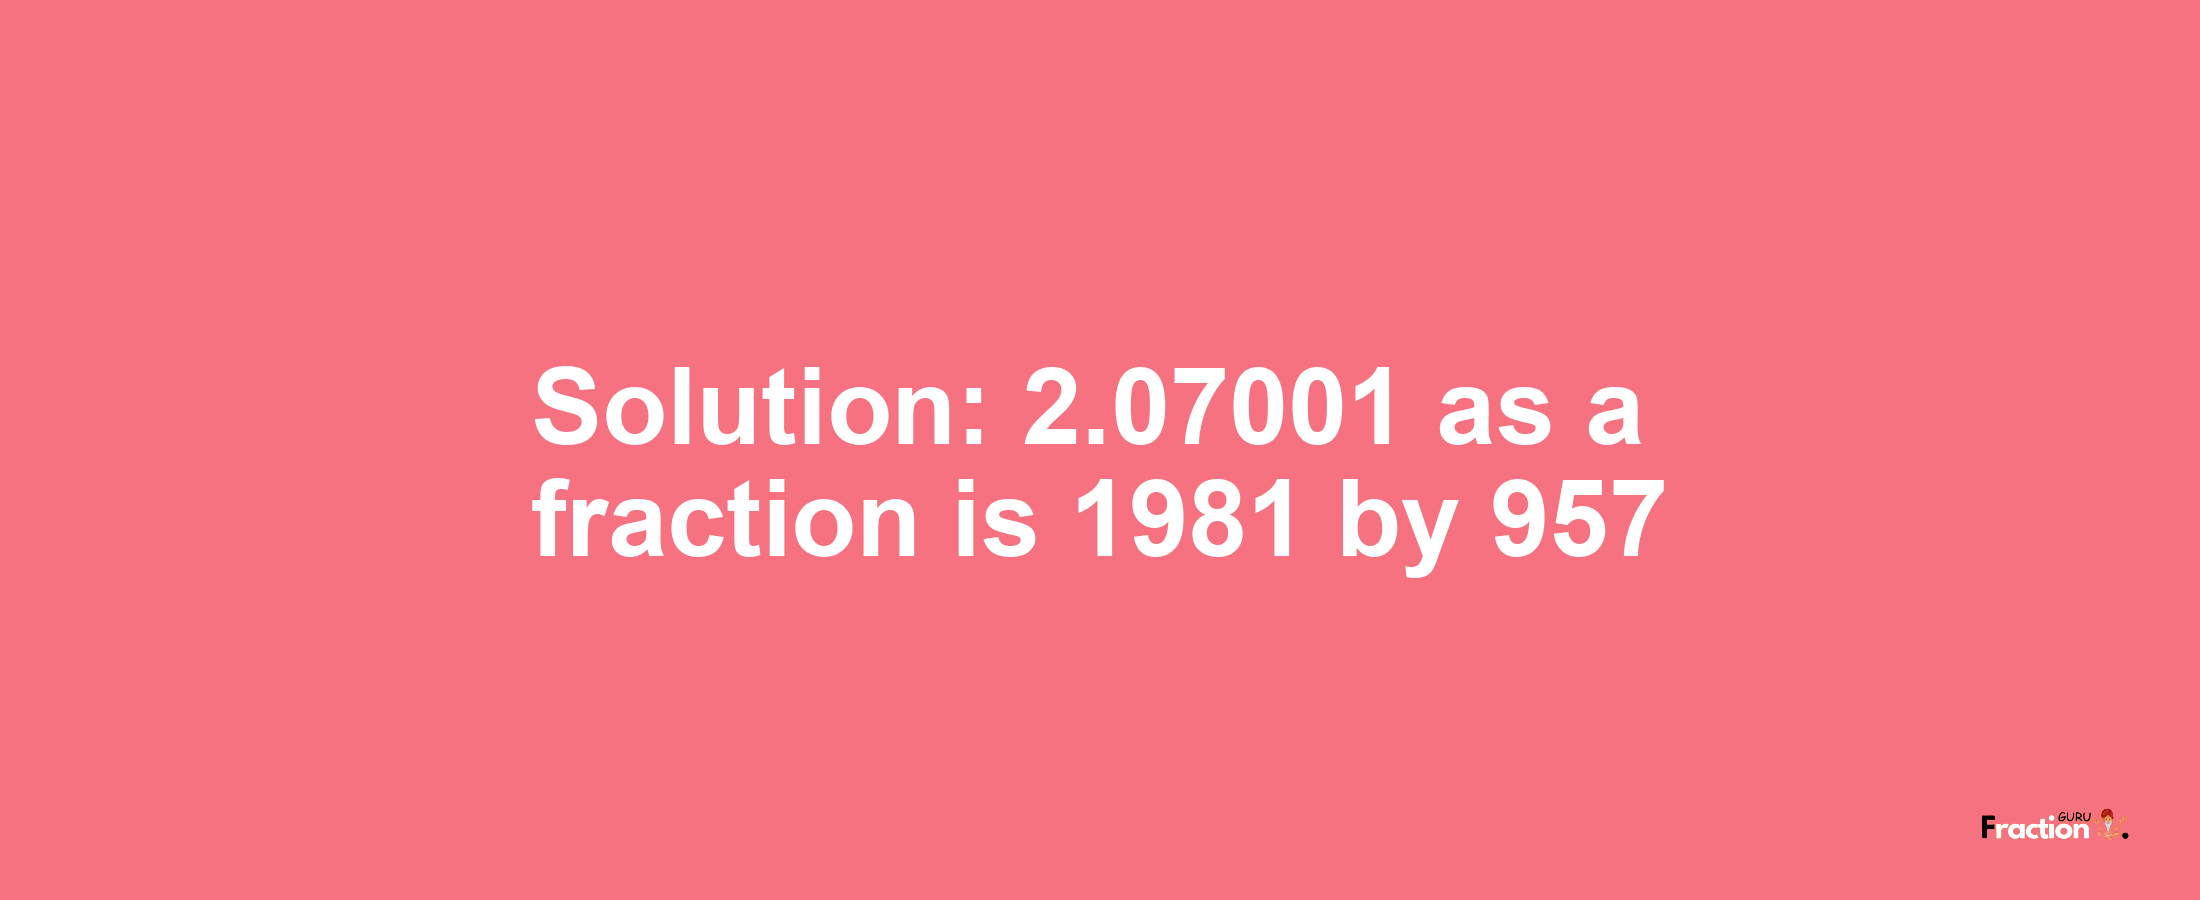 Solution:2.07001 as a fraction is 1981/957